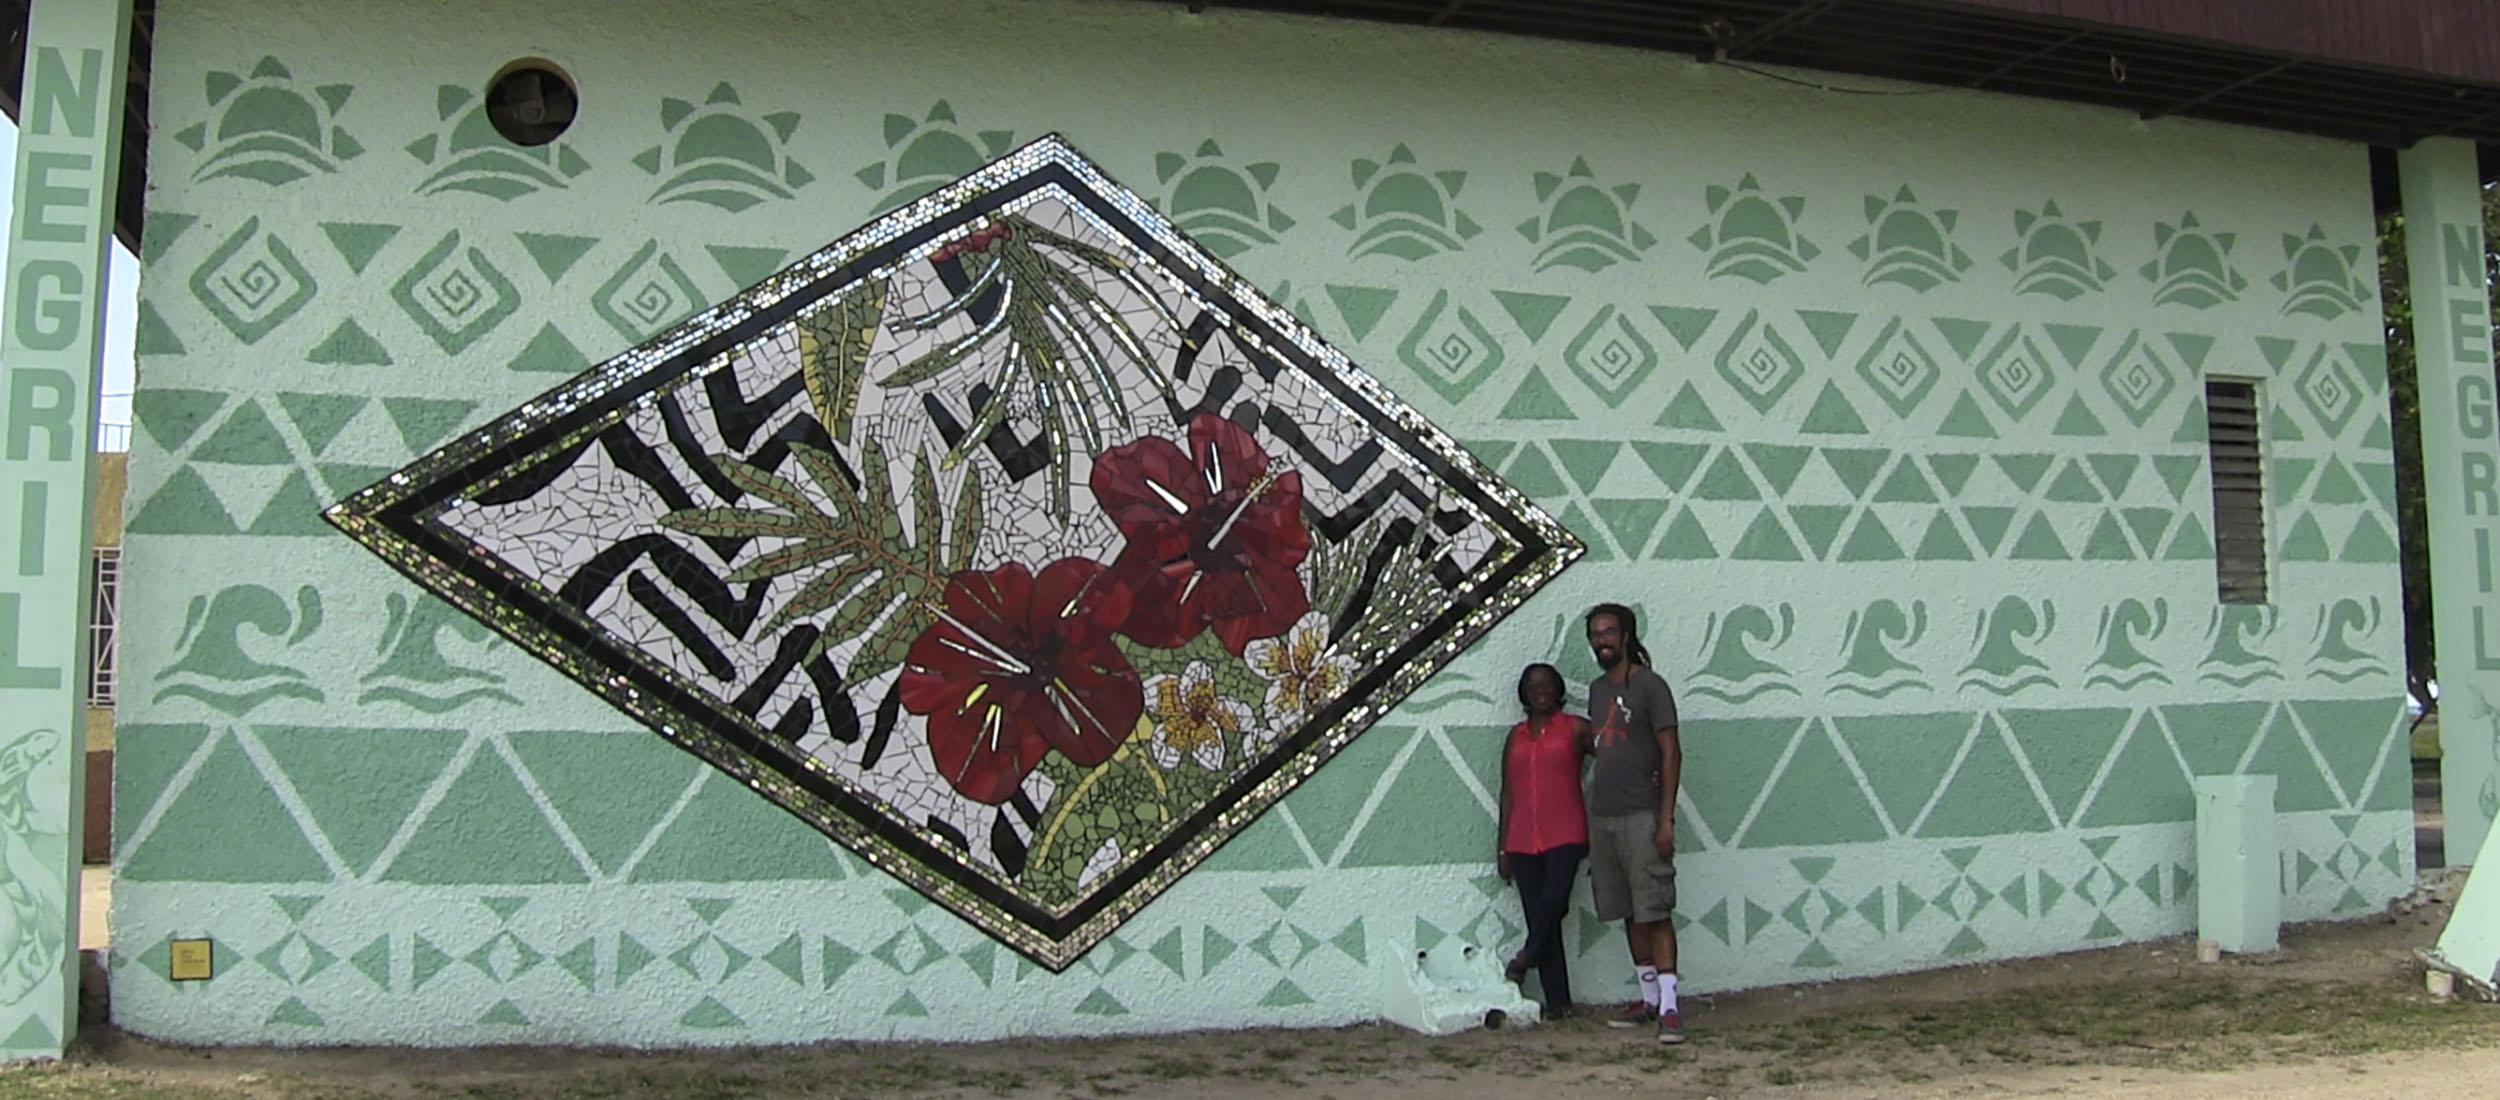 The New Artistic Mural @ the Negril Community Centre